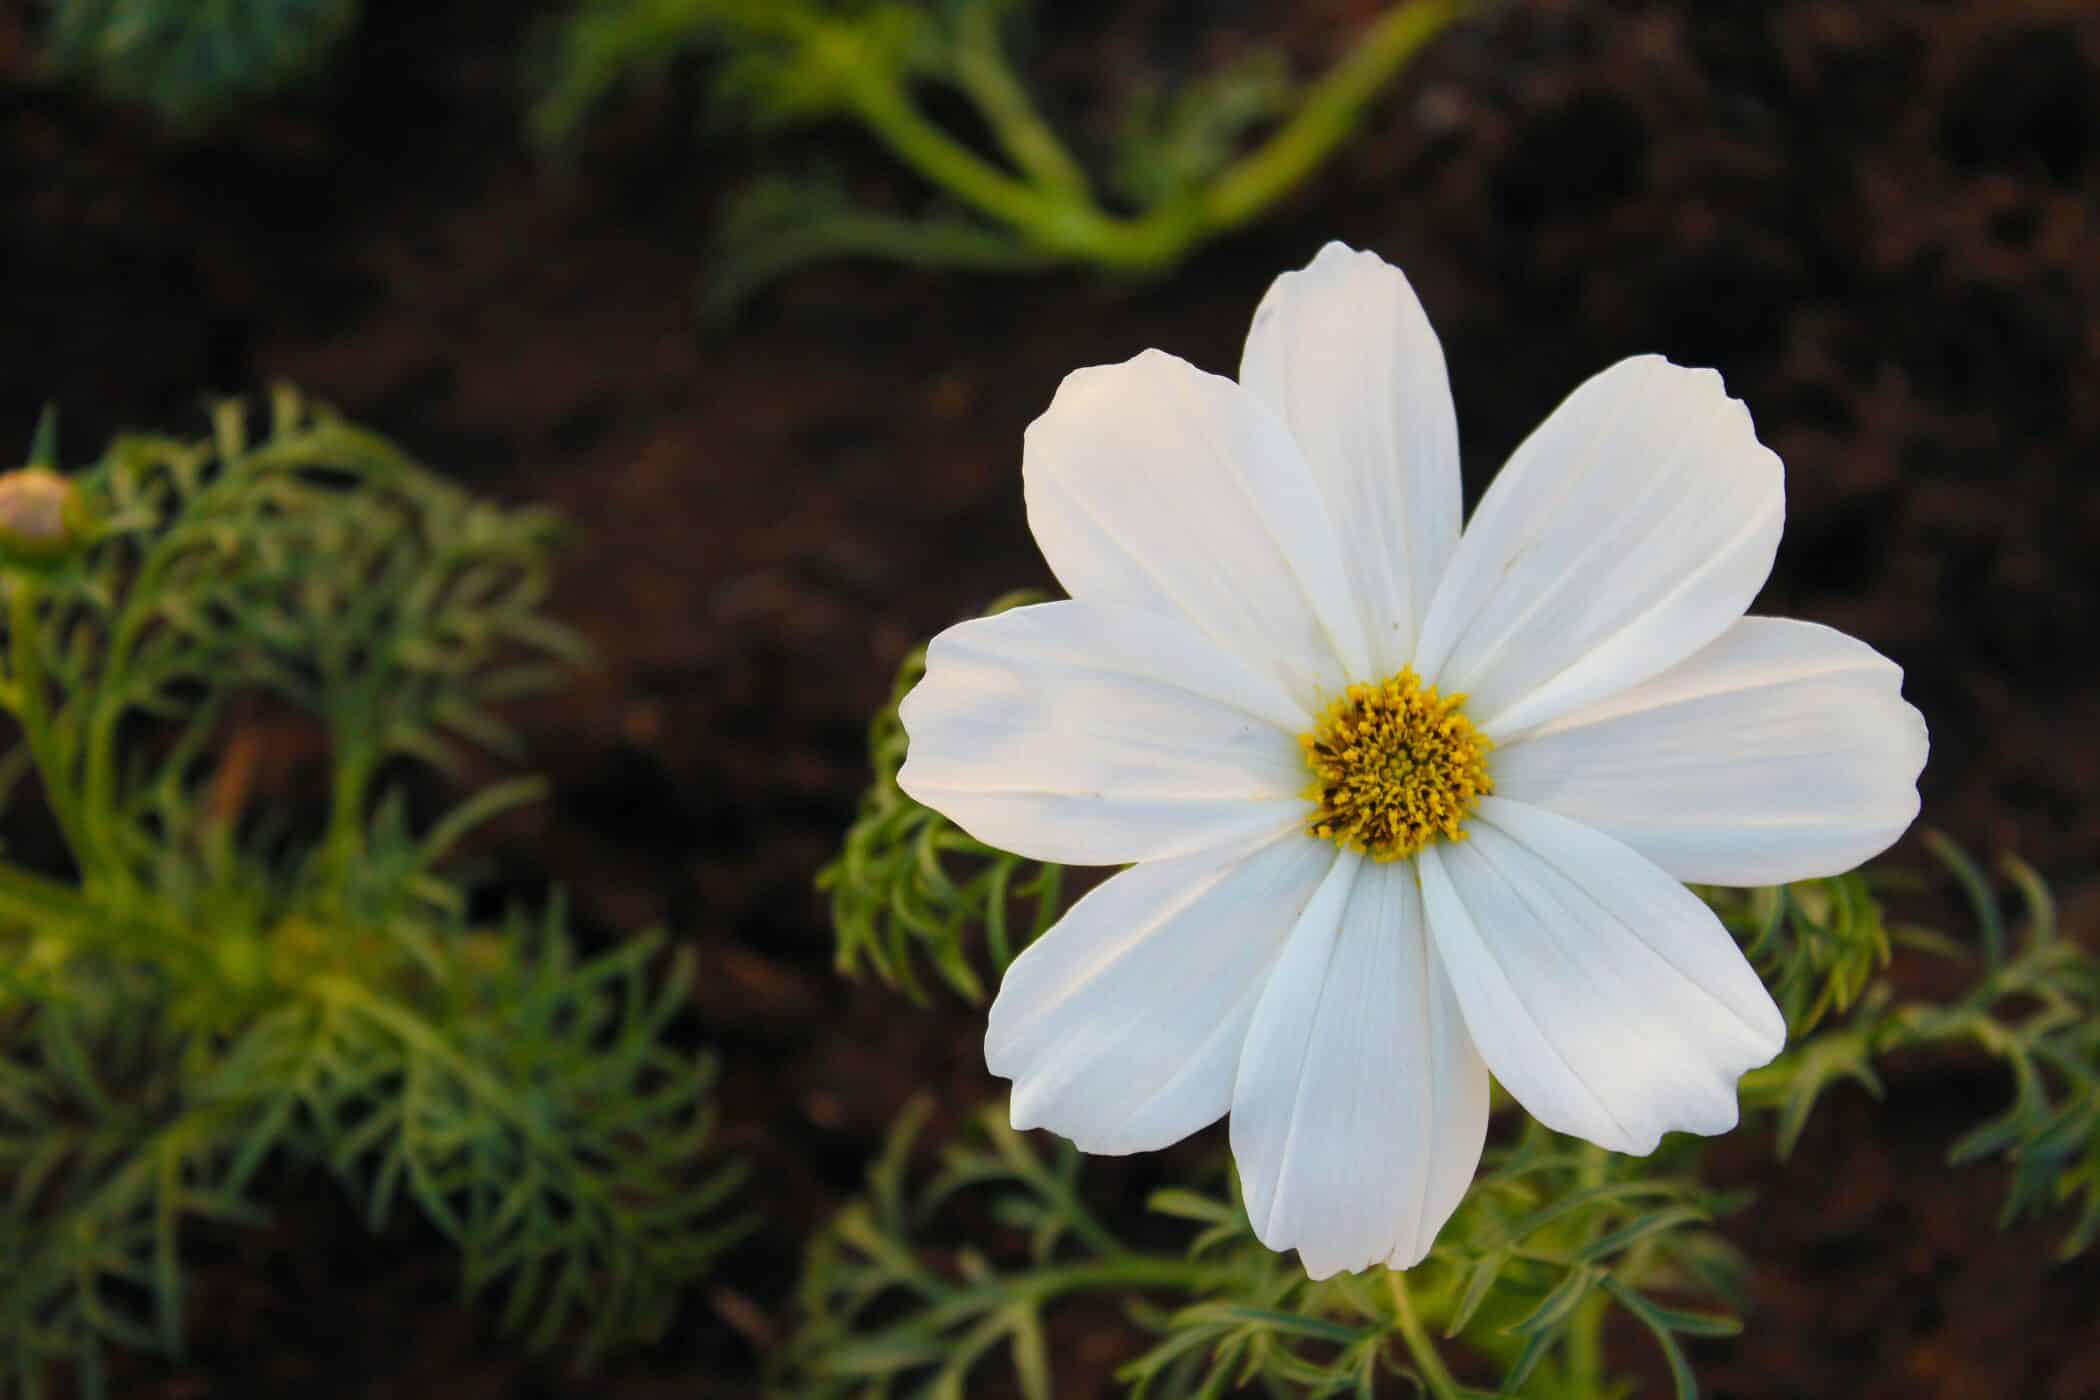 A white cosmos flower